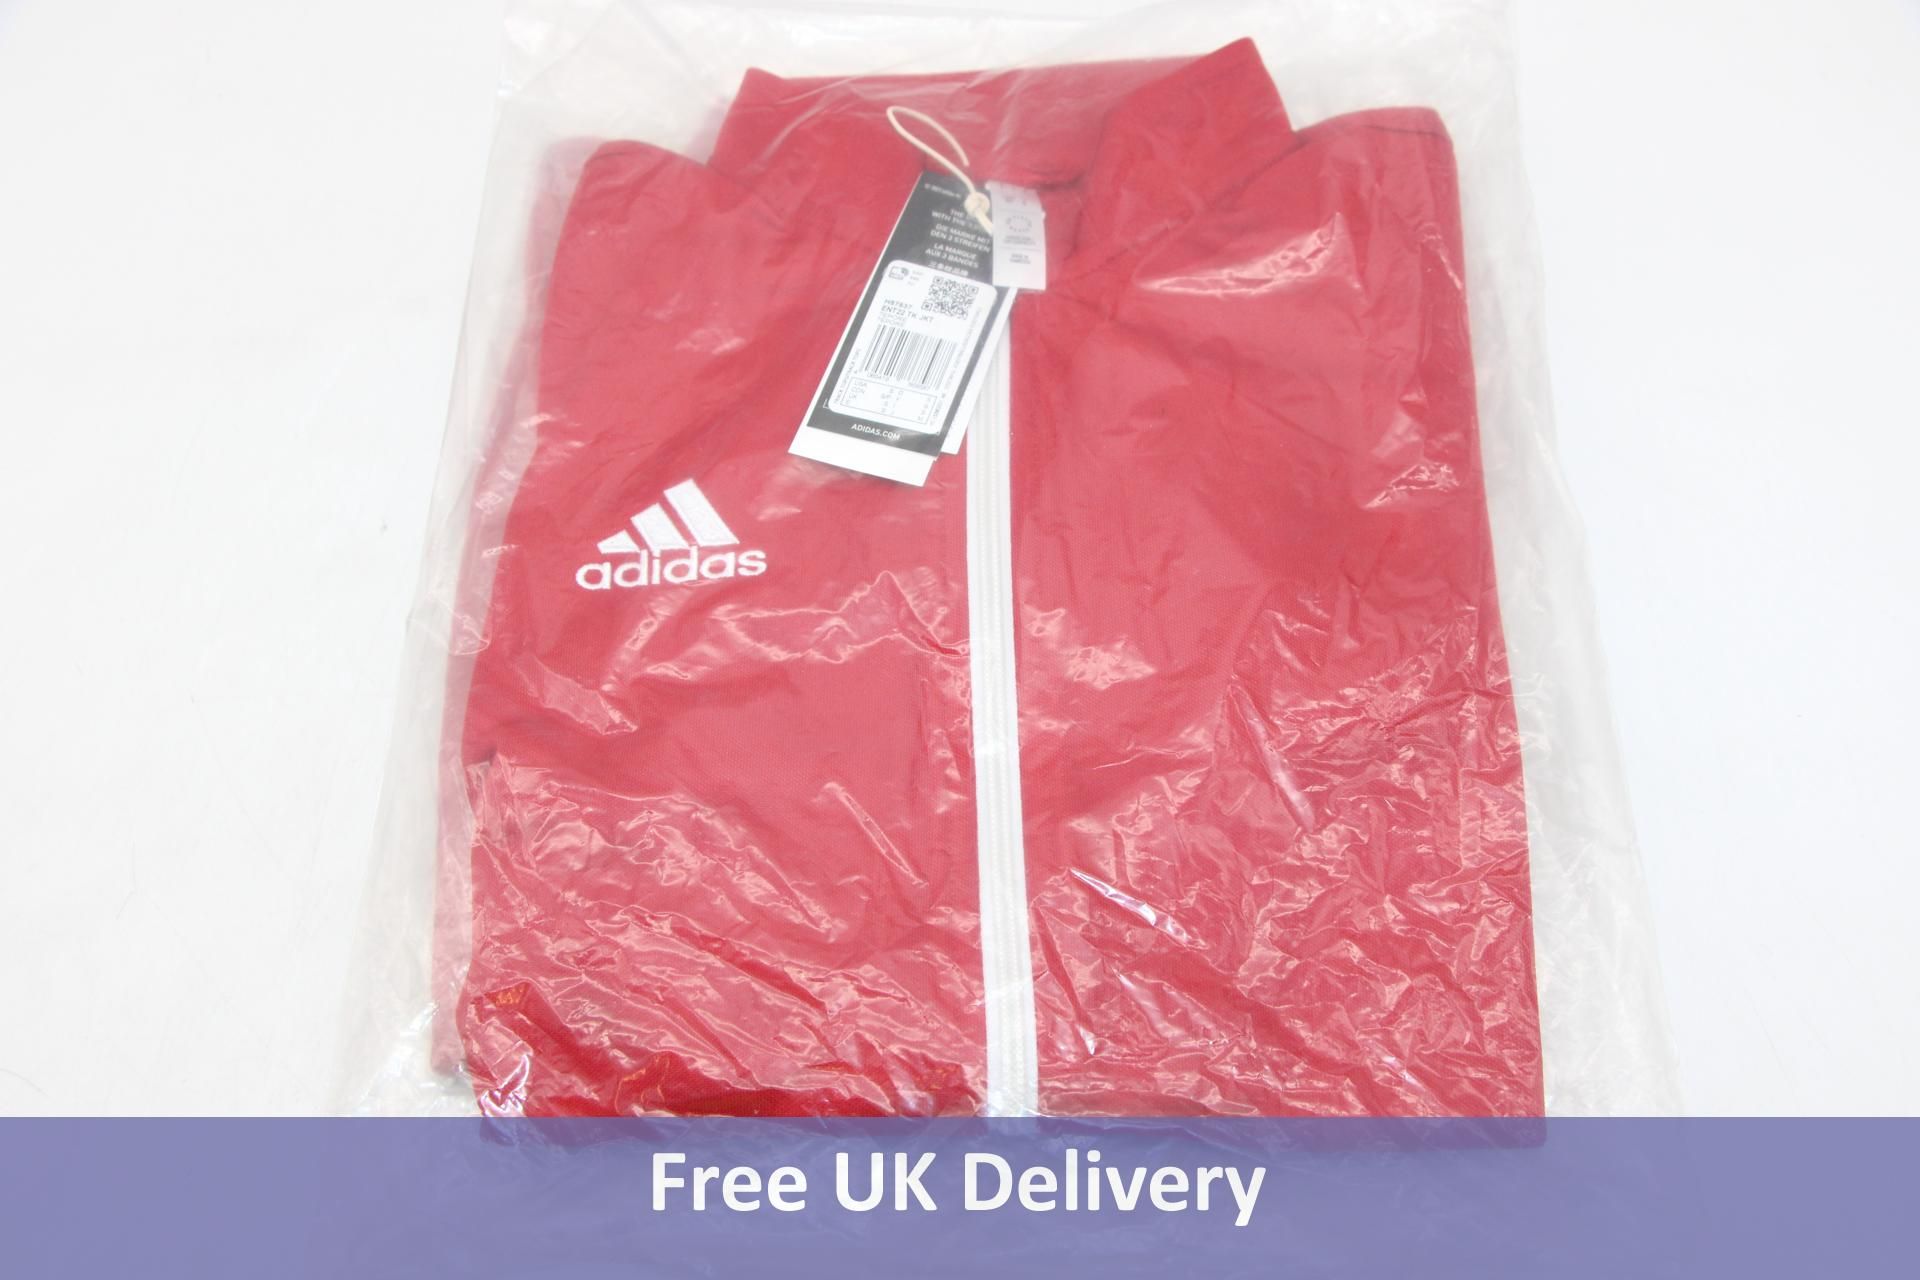 Two Adidas Entrada 22 Track Jackets, Red, UK Size M